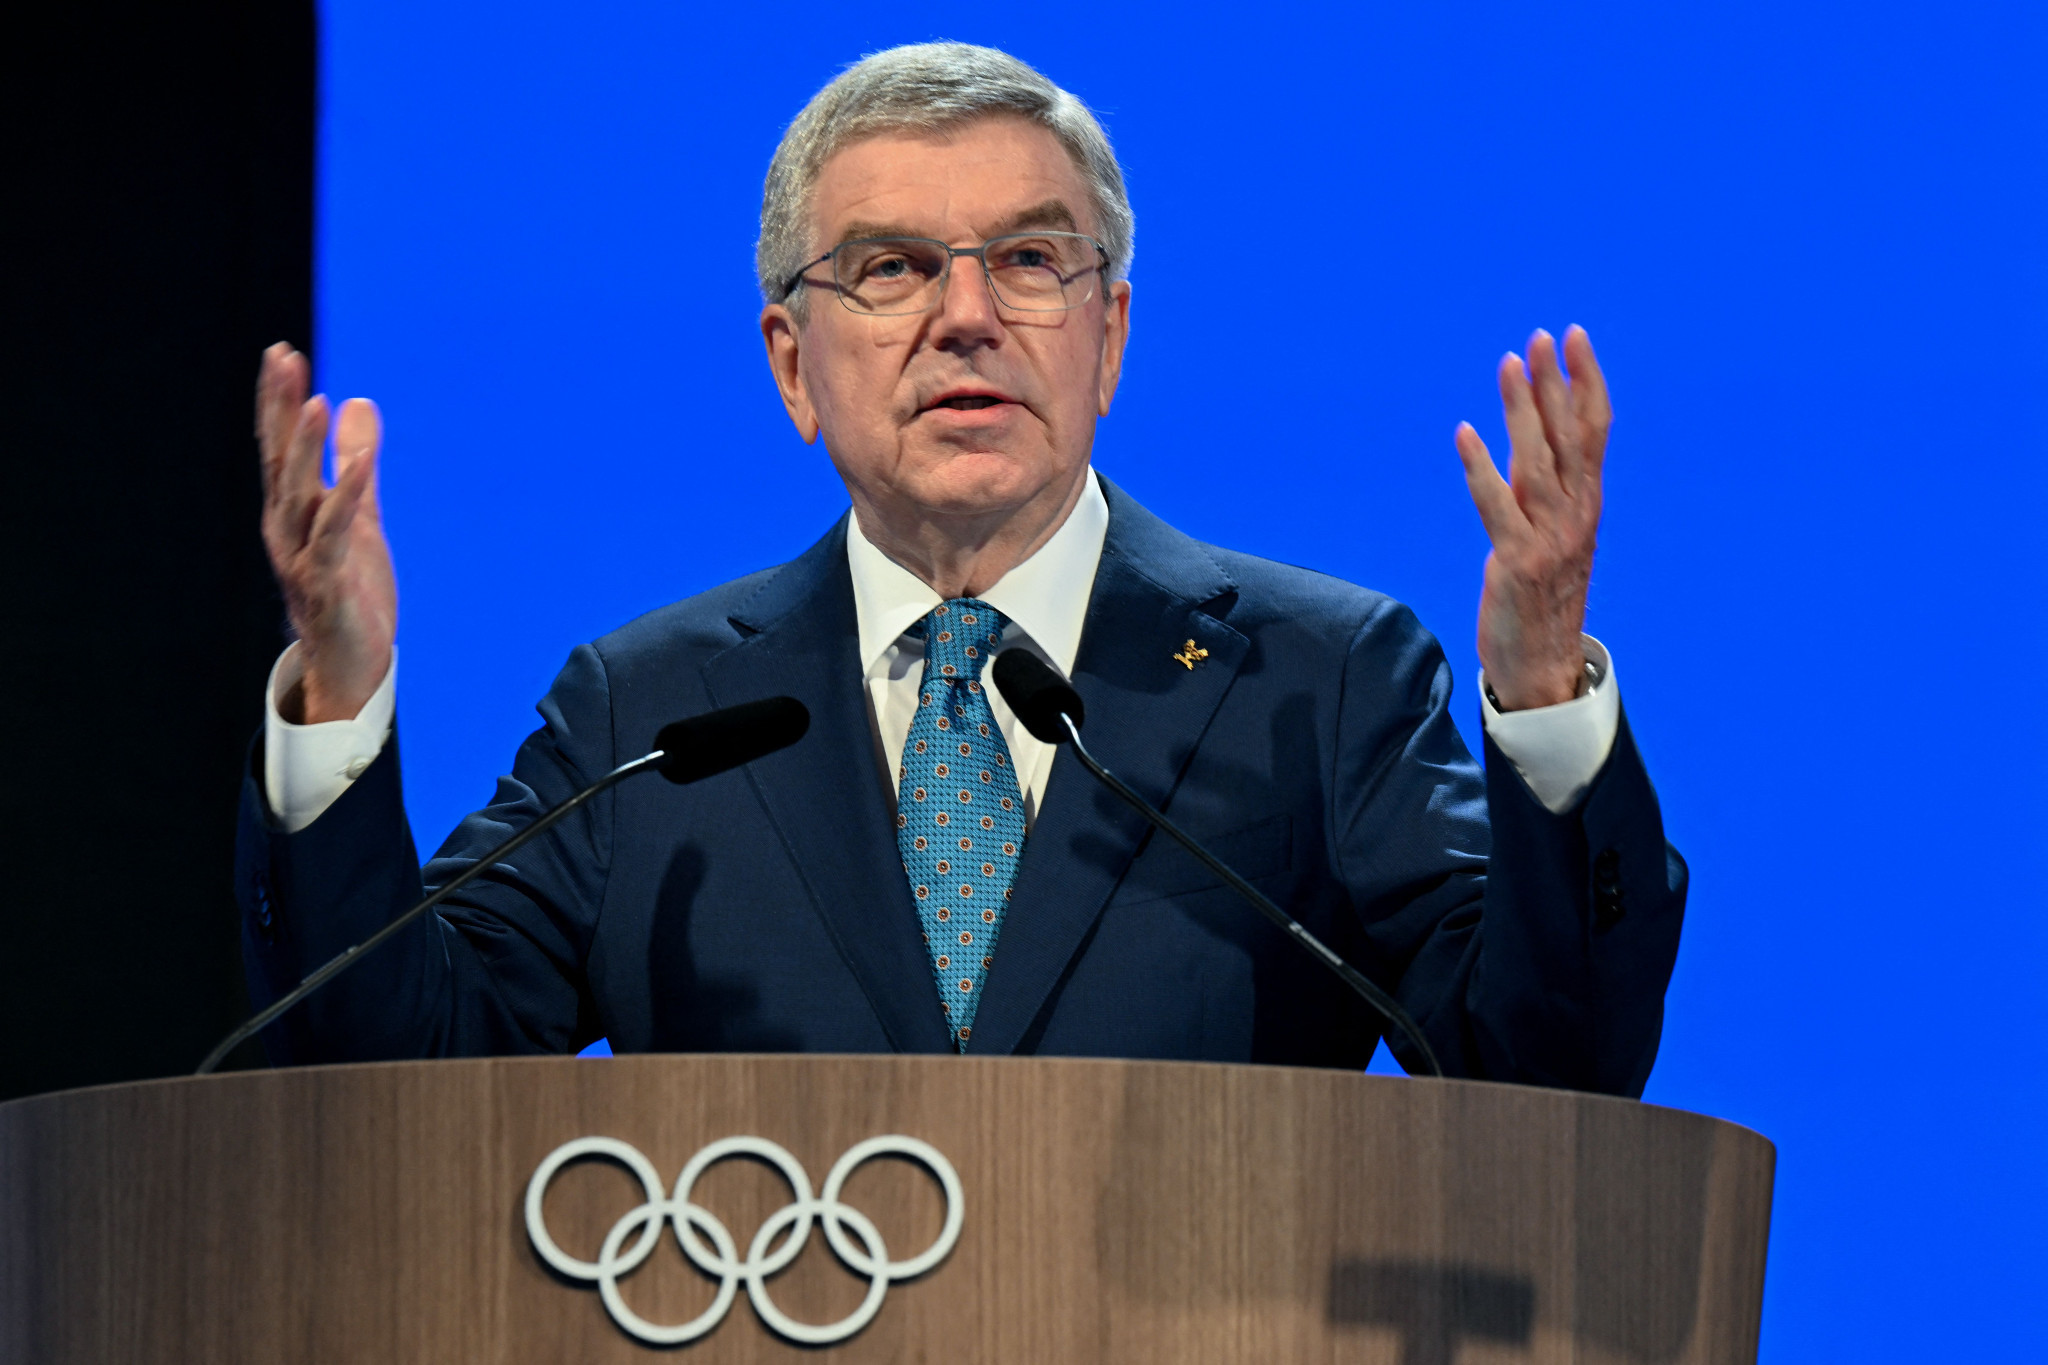 IOC members propose Bach should be allowed to stay on as President beyond current term